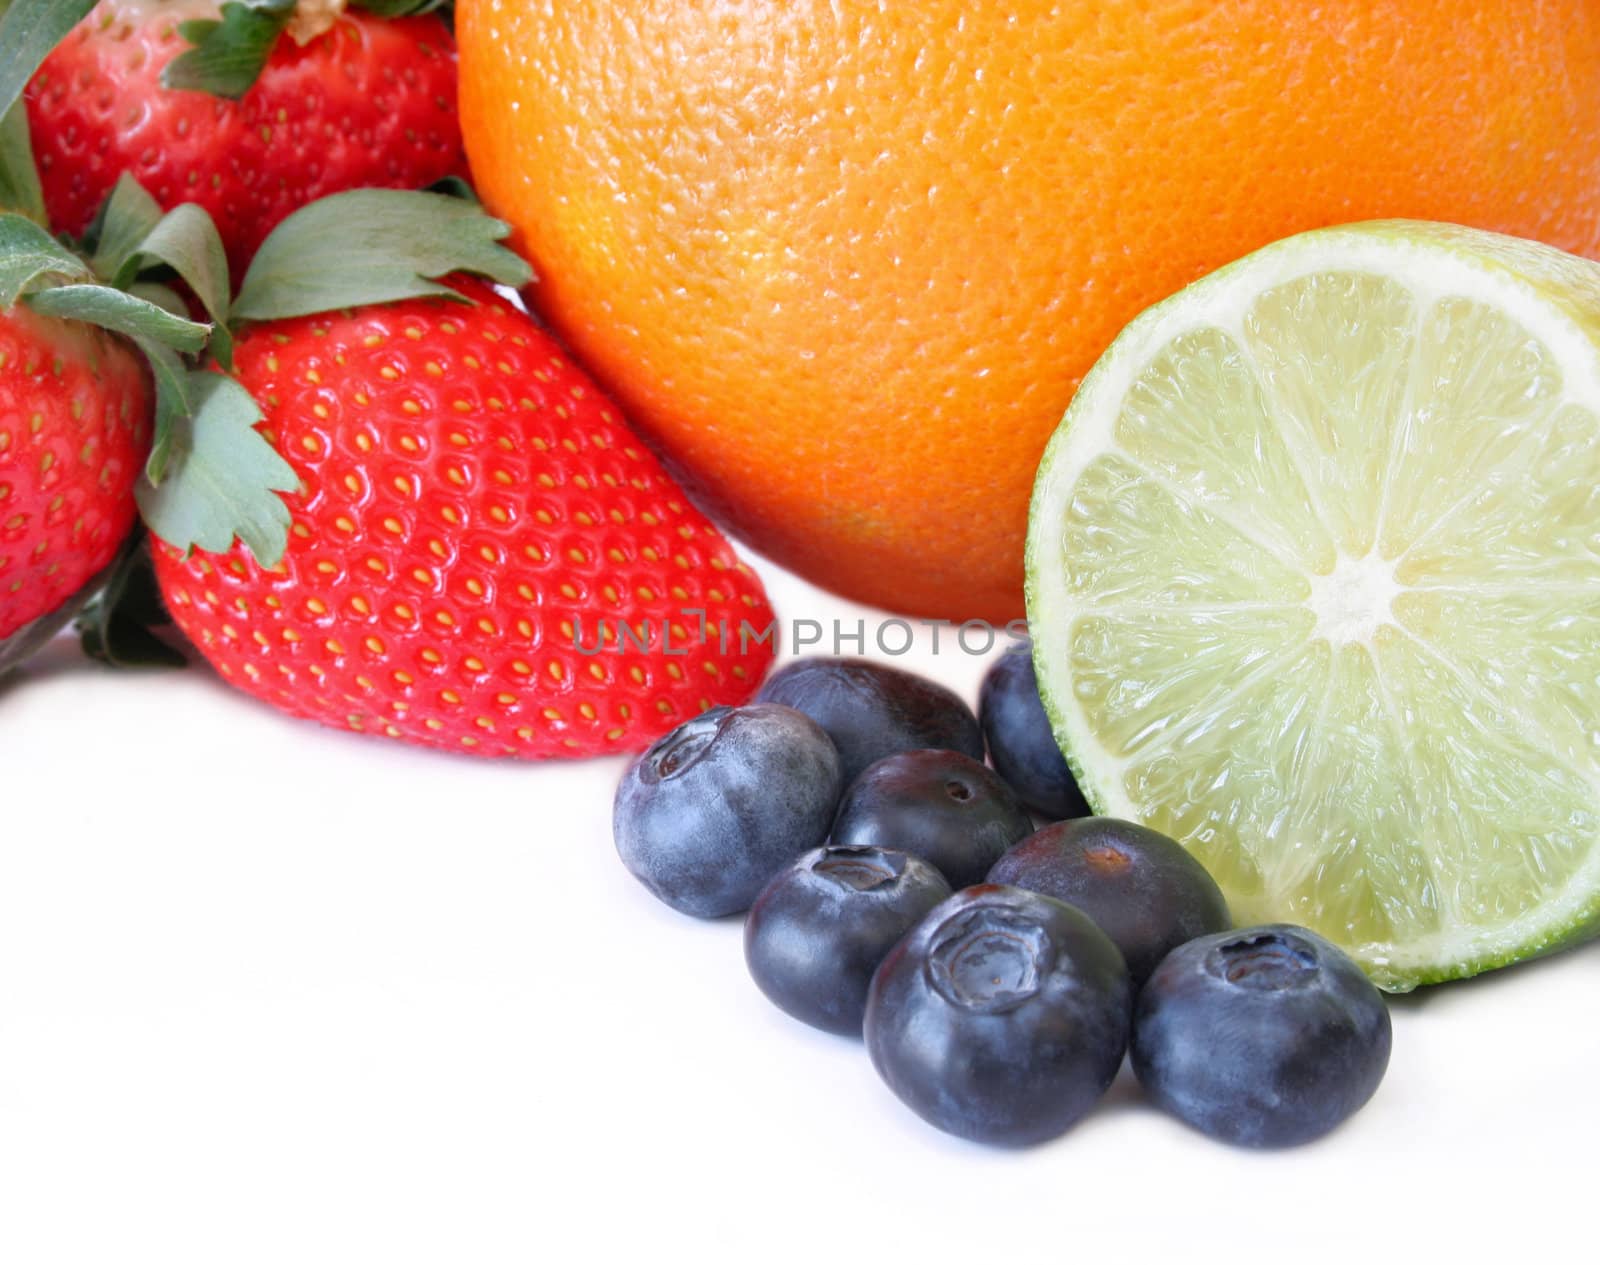 Strawberry, blueberries, Lime, and an orange all on a white background with copy space.